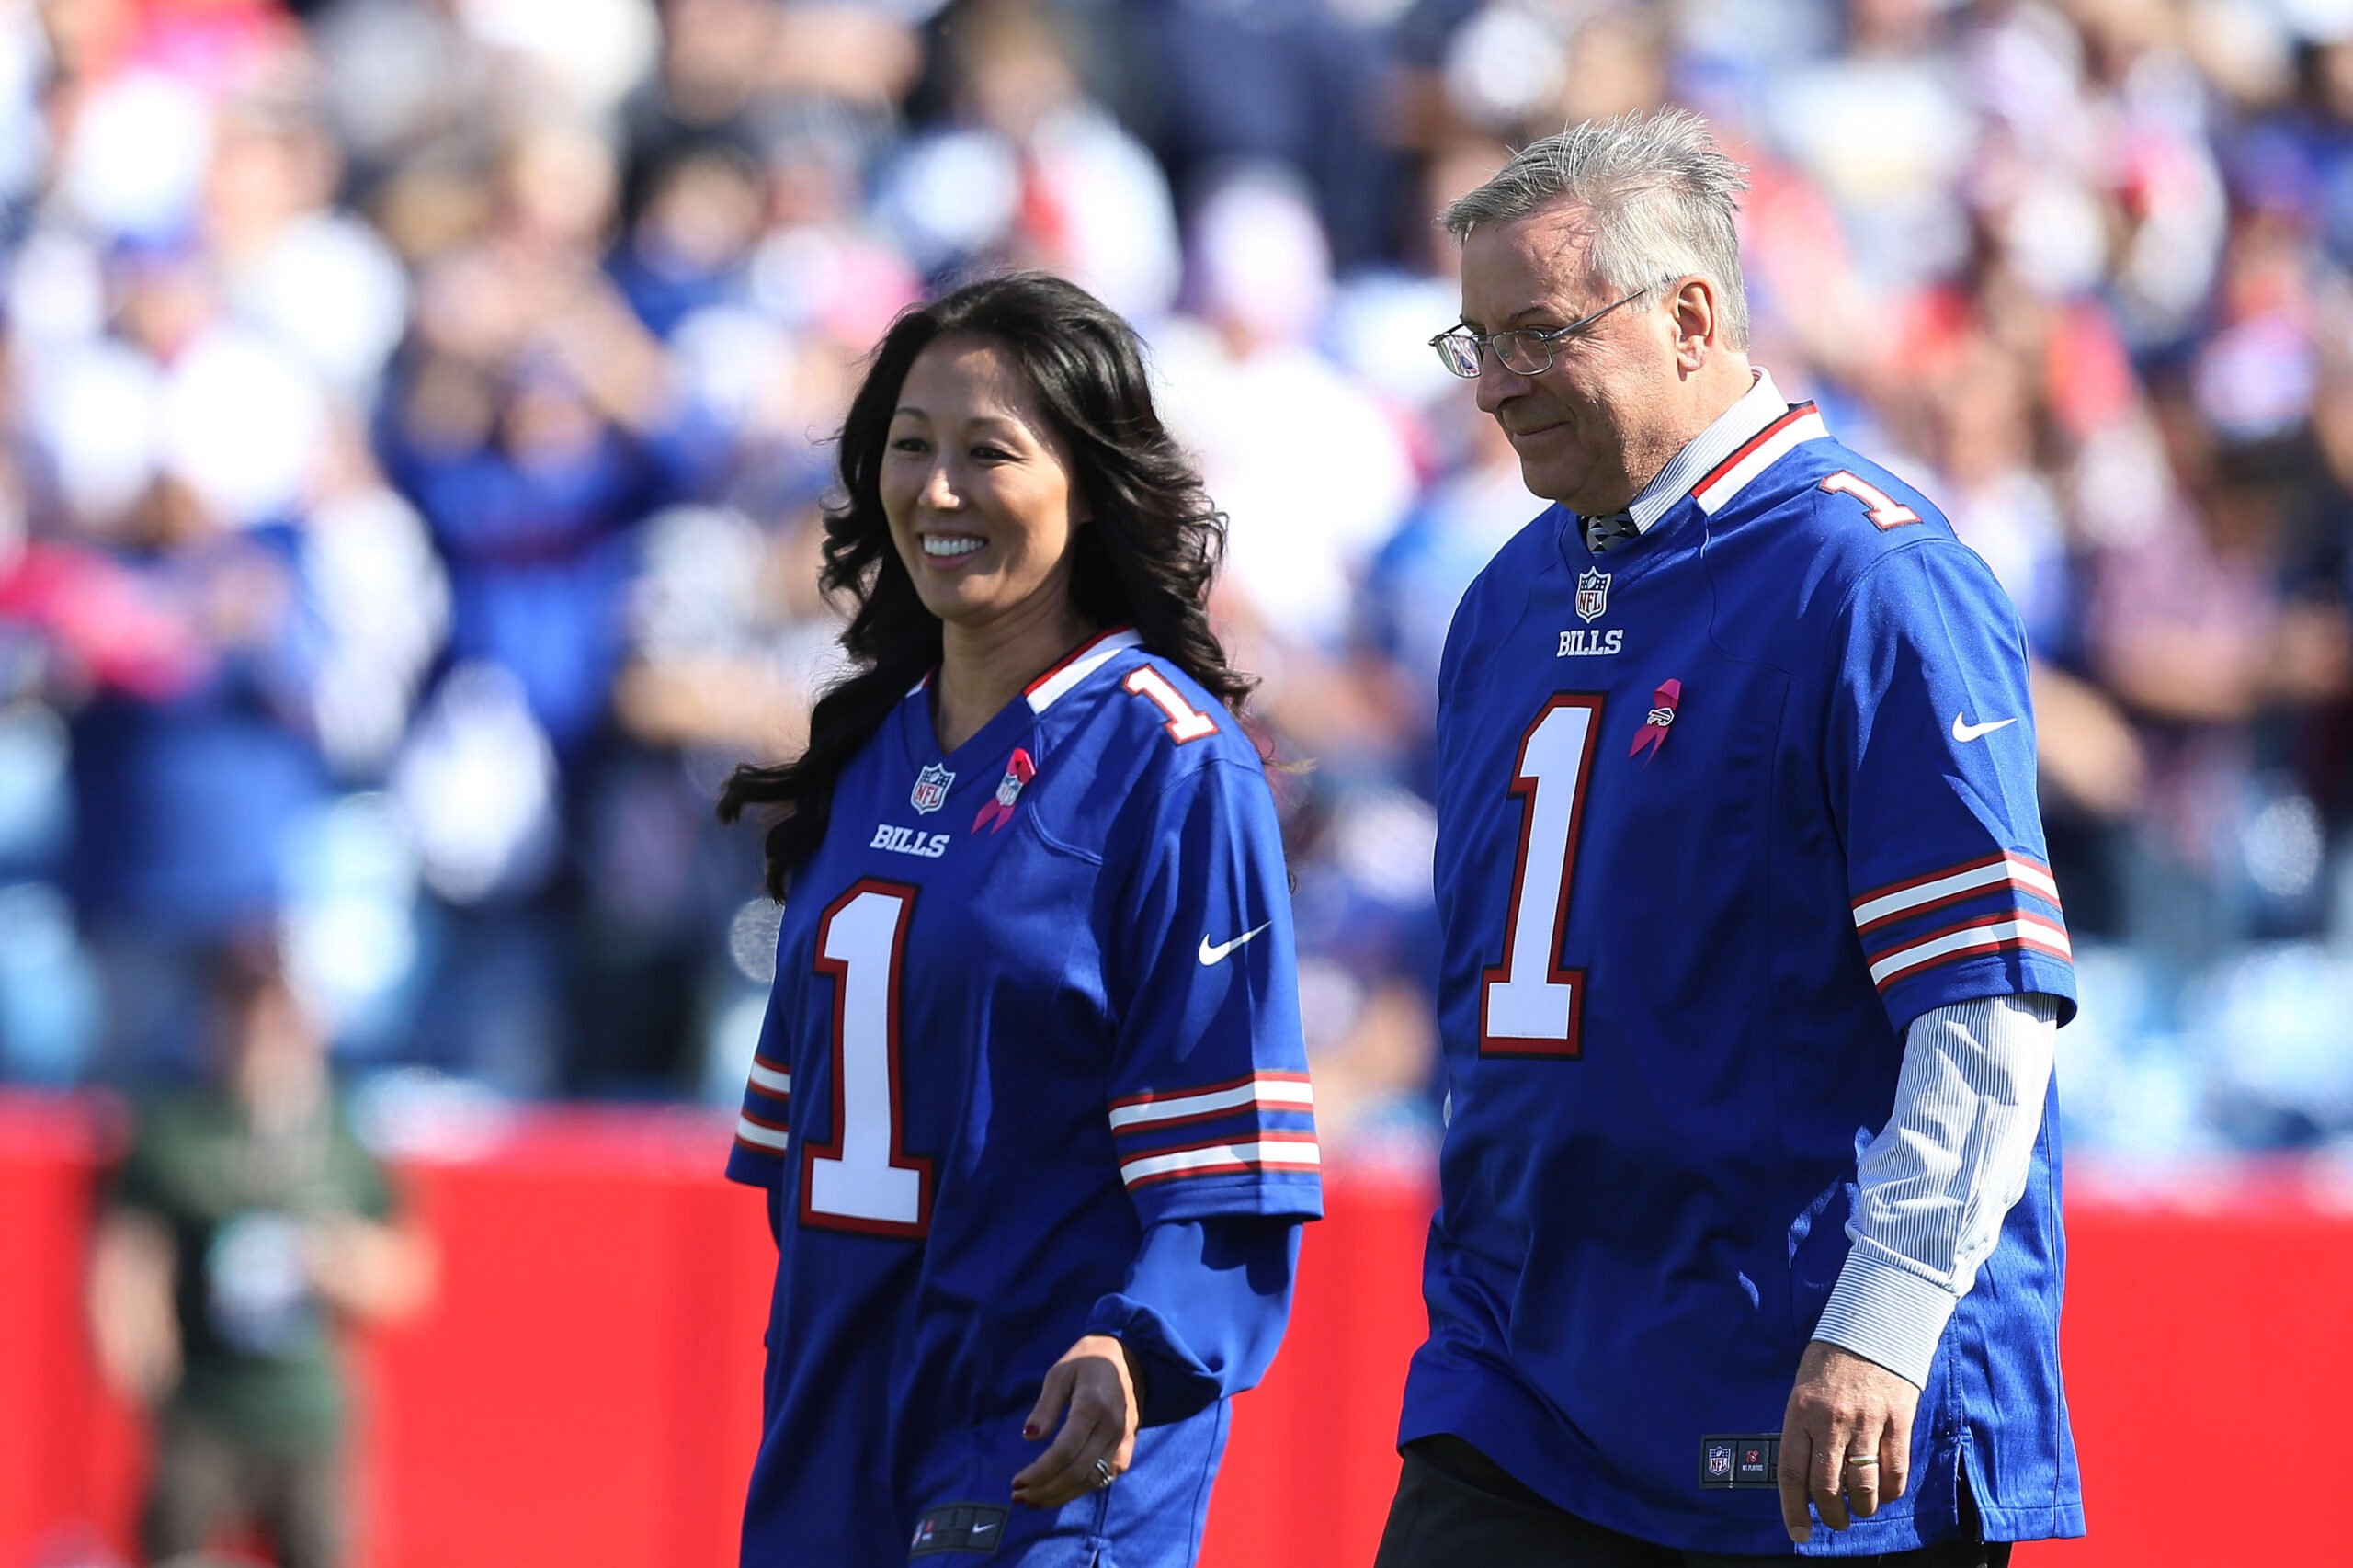 Kim and Terry Pegula, owners of the NFL's Buffalo Bills, and the NHL's Buffalo Sabres.